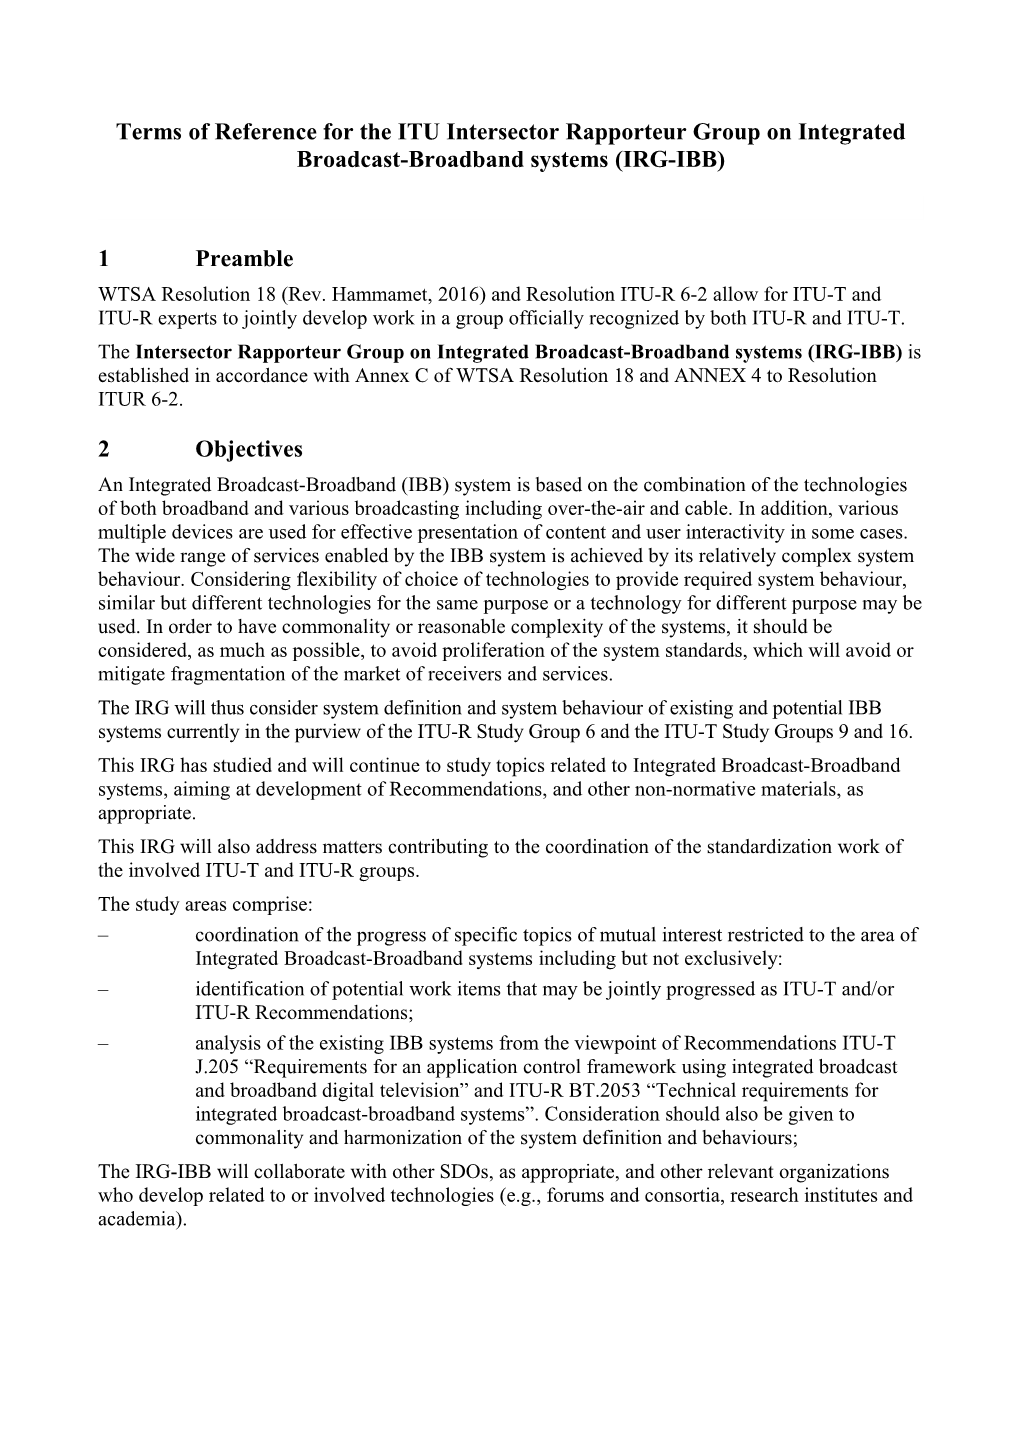 Terms of Reference for the ITU Intersector Rapporteur Group on Integrated Broadcast-Broadband